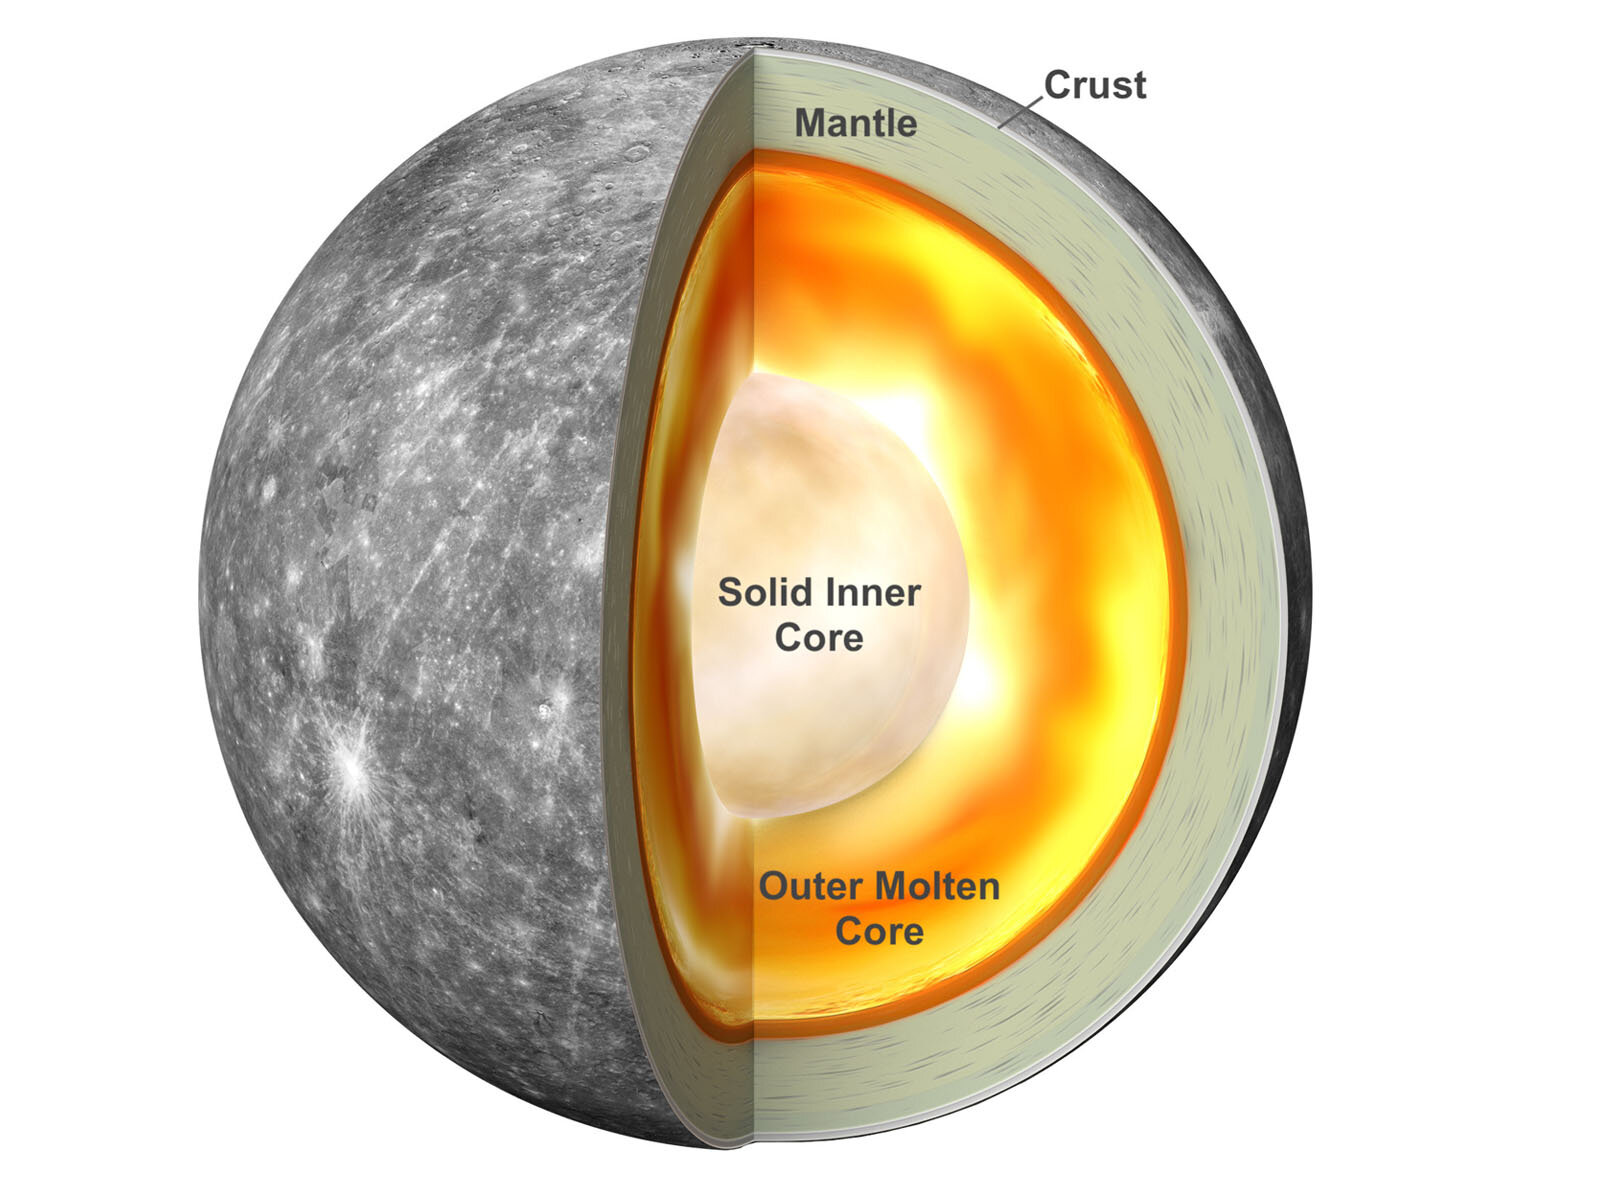 Why does Mercury have such a big iron core? Magnetism!